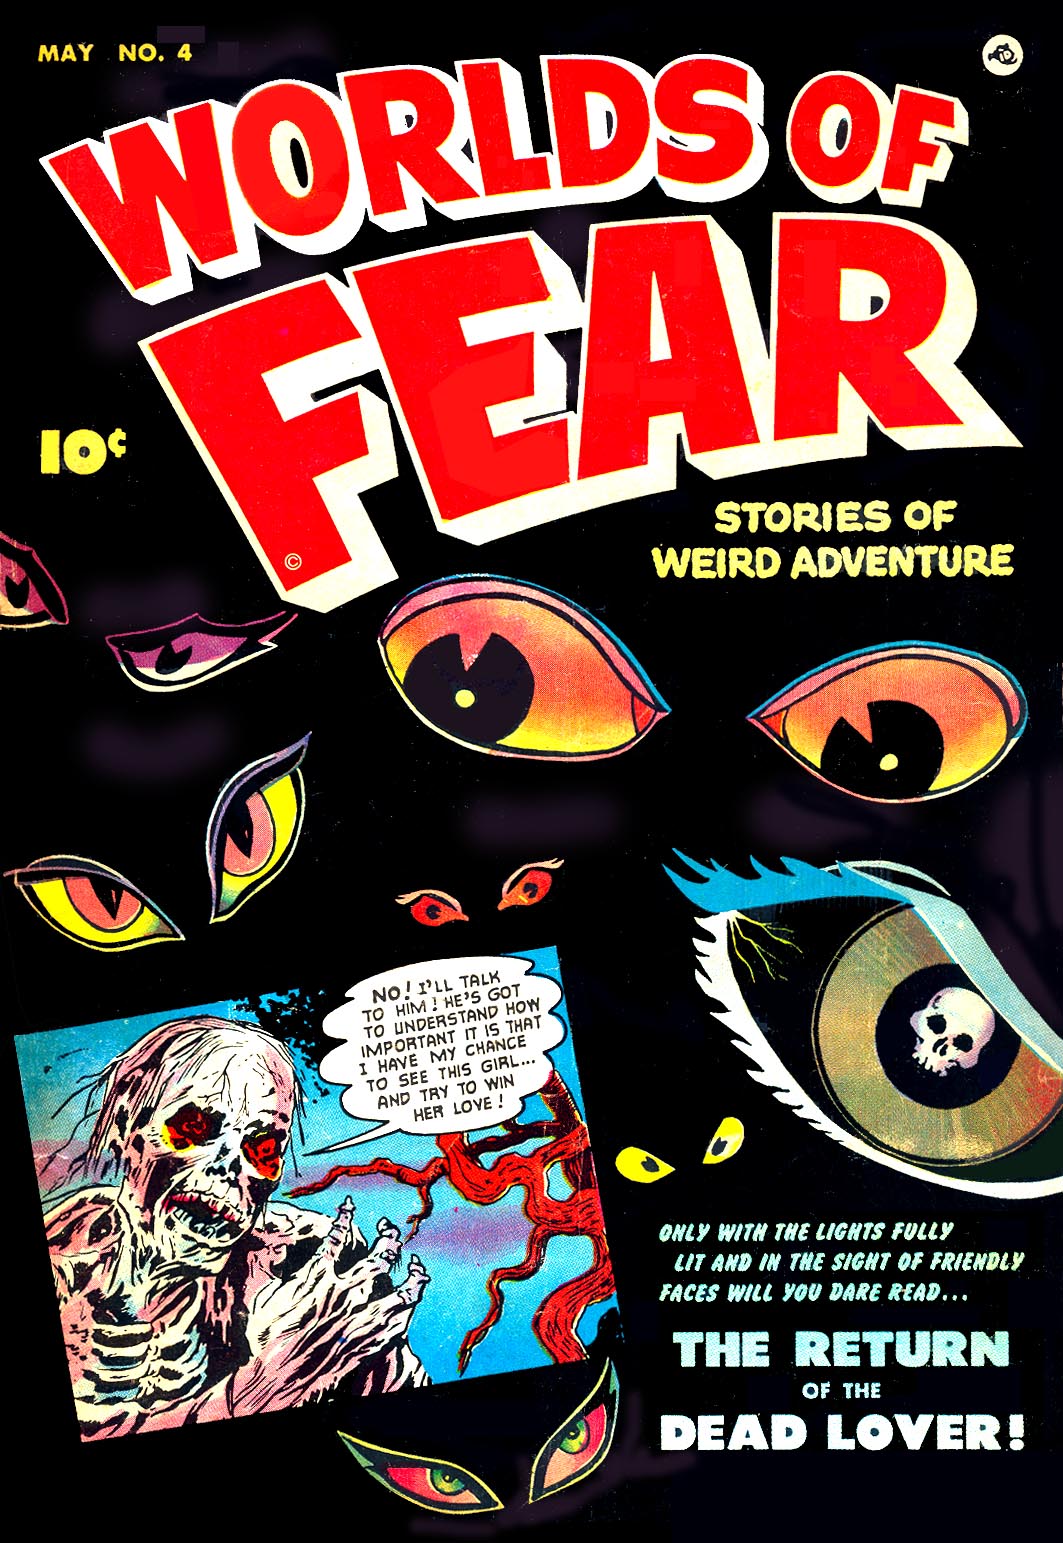 Read online Worlds of Fear comic -  Issue #4 - 1